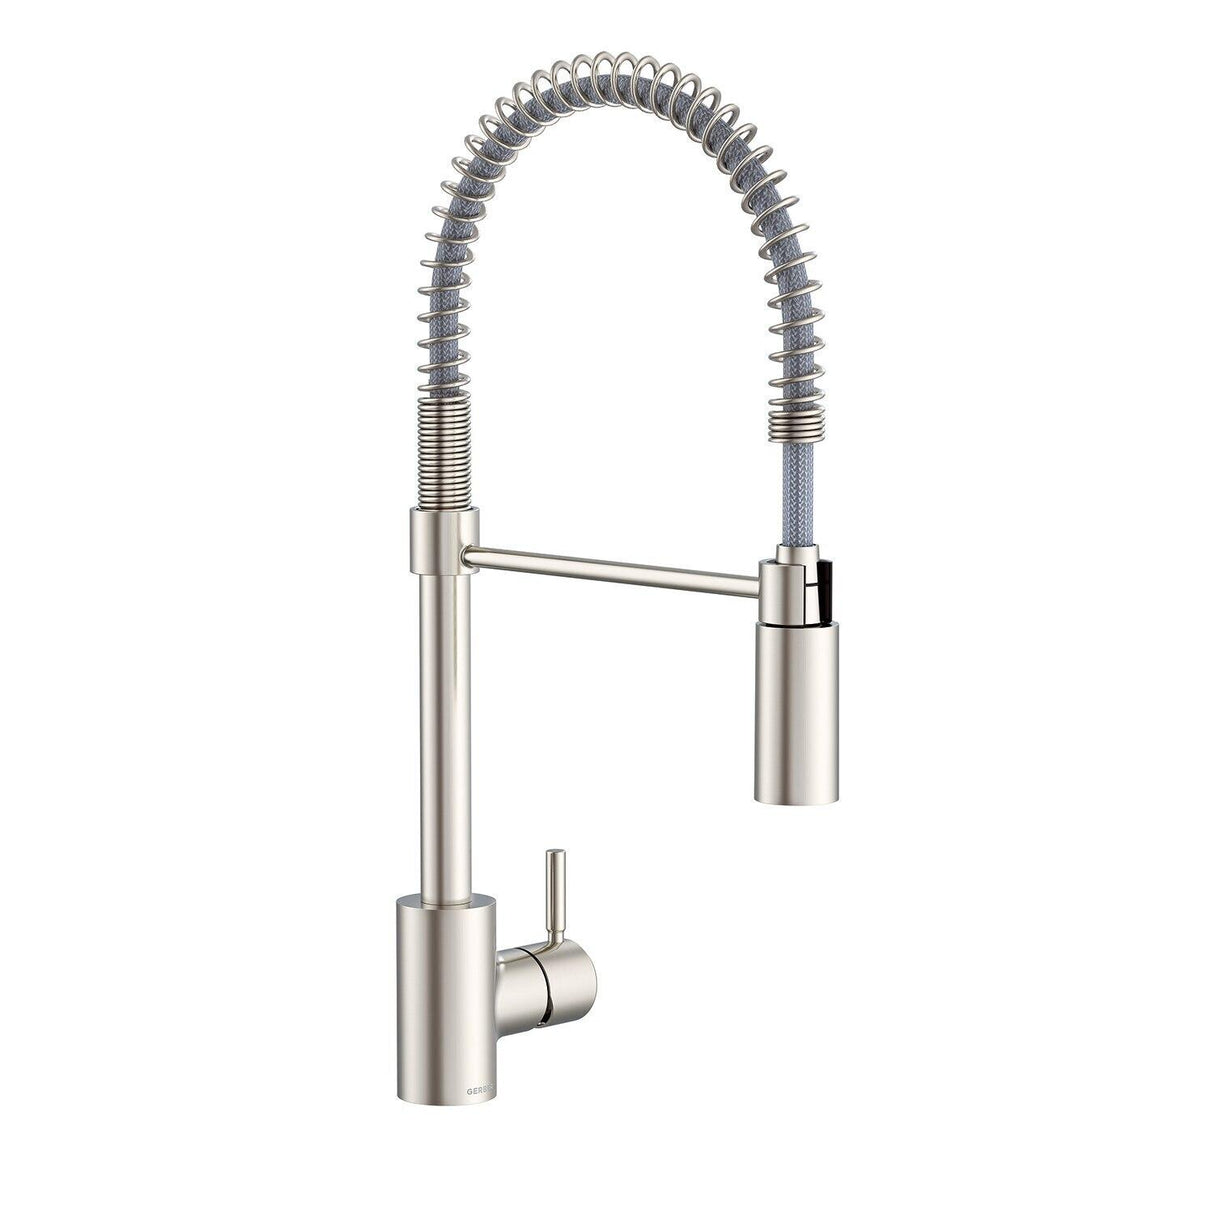 Gerber D451288SS The Foodie Pre-rinse Single Handle Spring-spout Kitchen Faucet -...